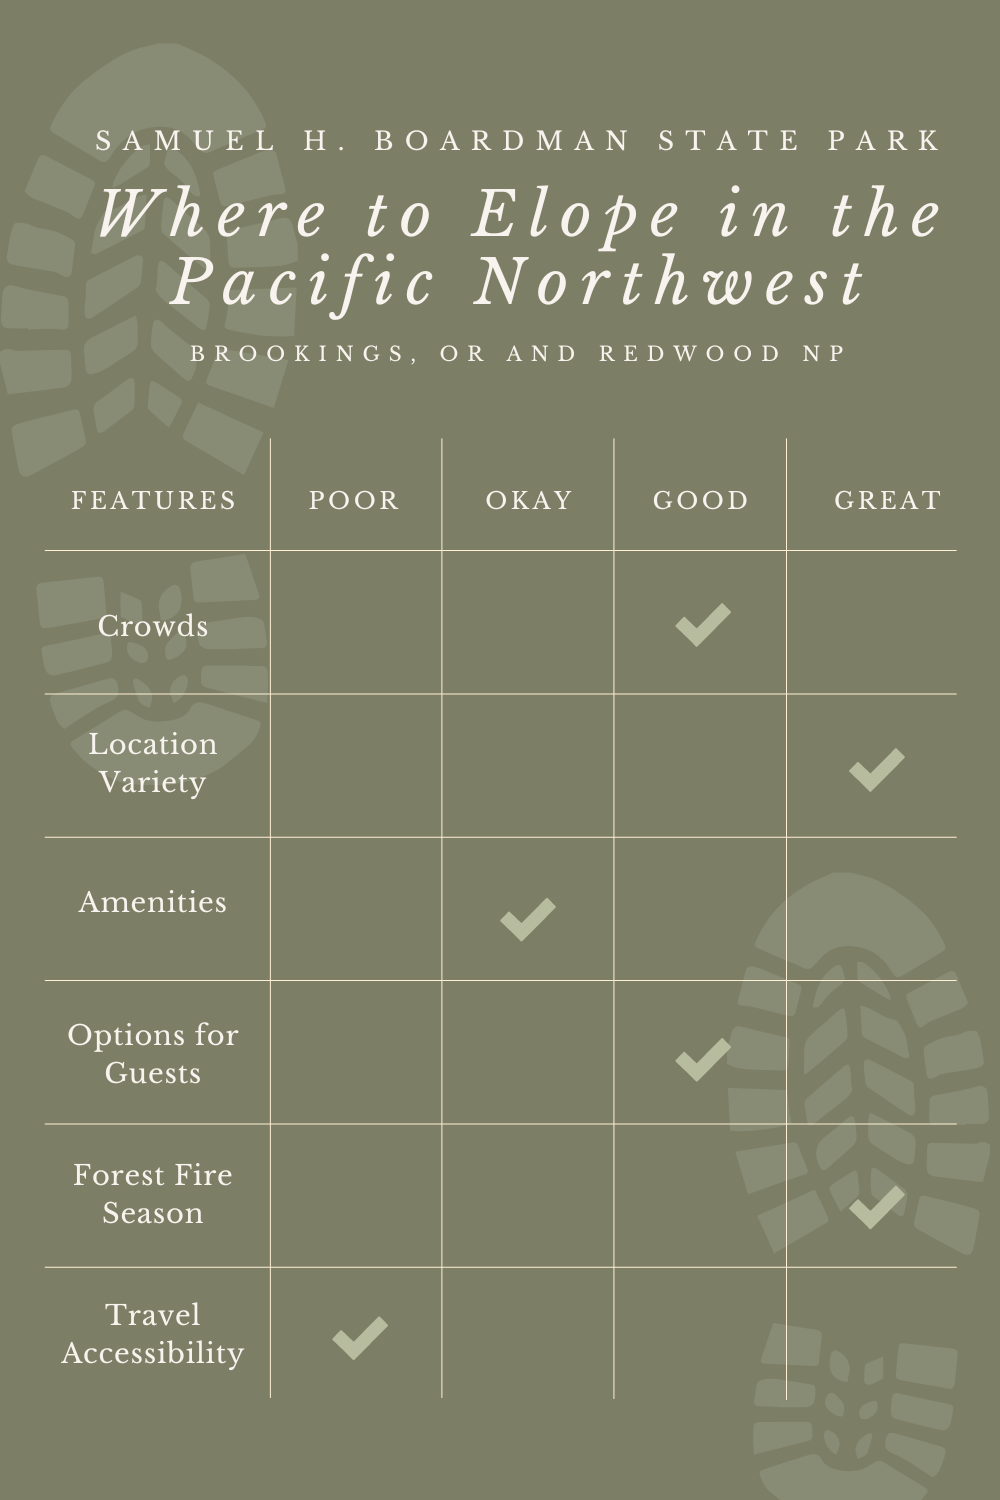 Where to elope in the Pacific Northwest - Samuel H. Boardman, Brookings, OR, and Redwood National park graphic